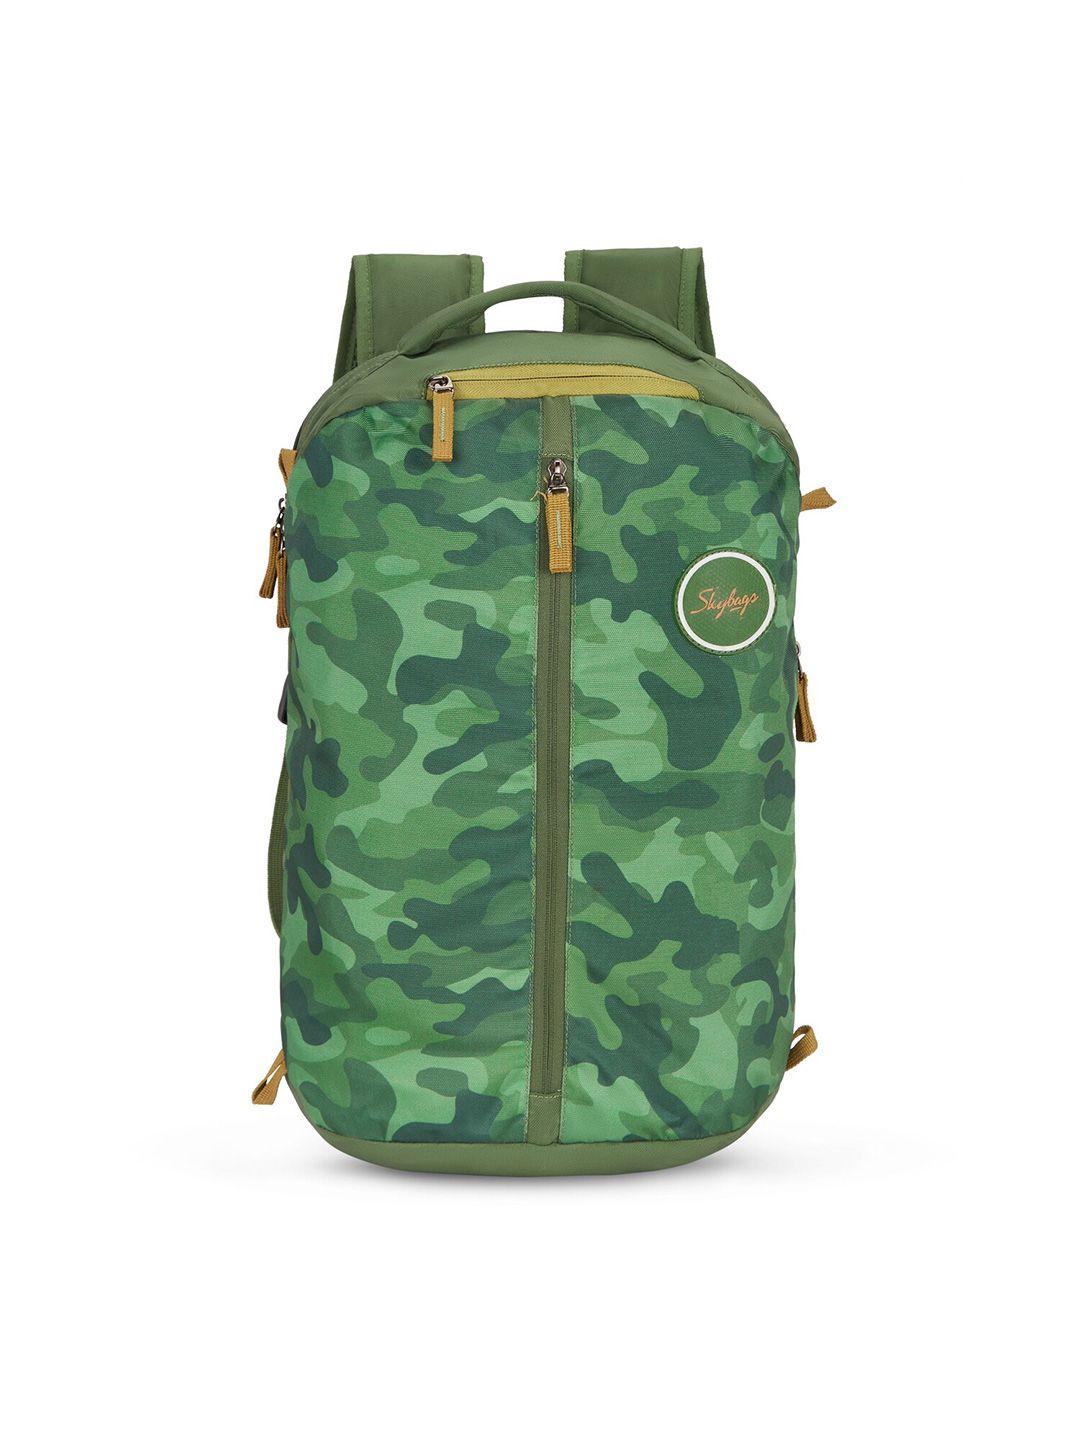 Skybags Unisex Camouflage Printed Padded Backpack